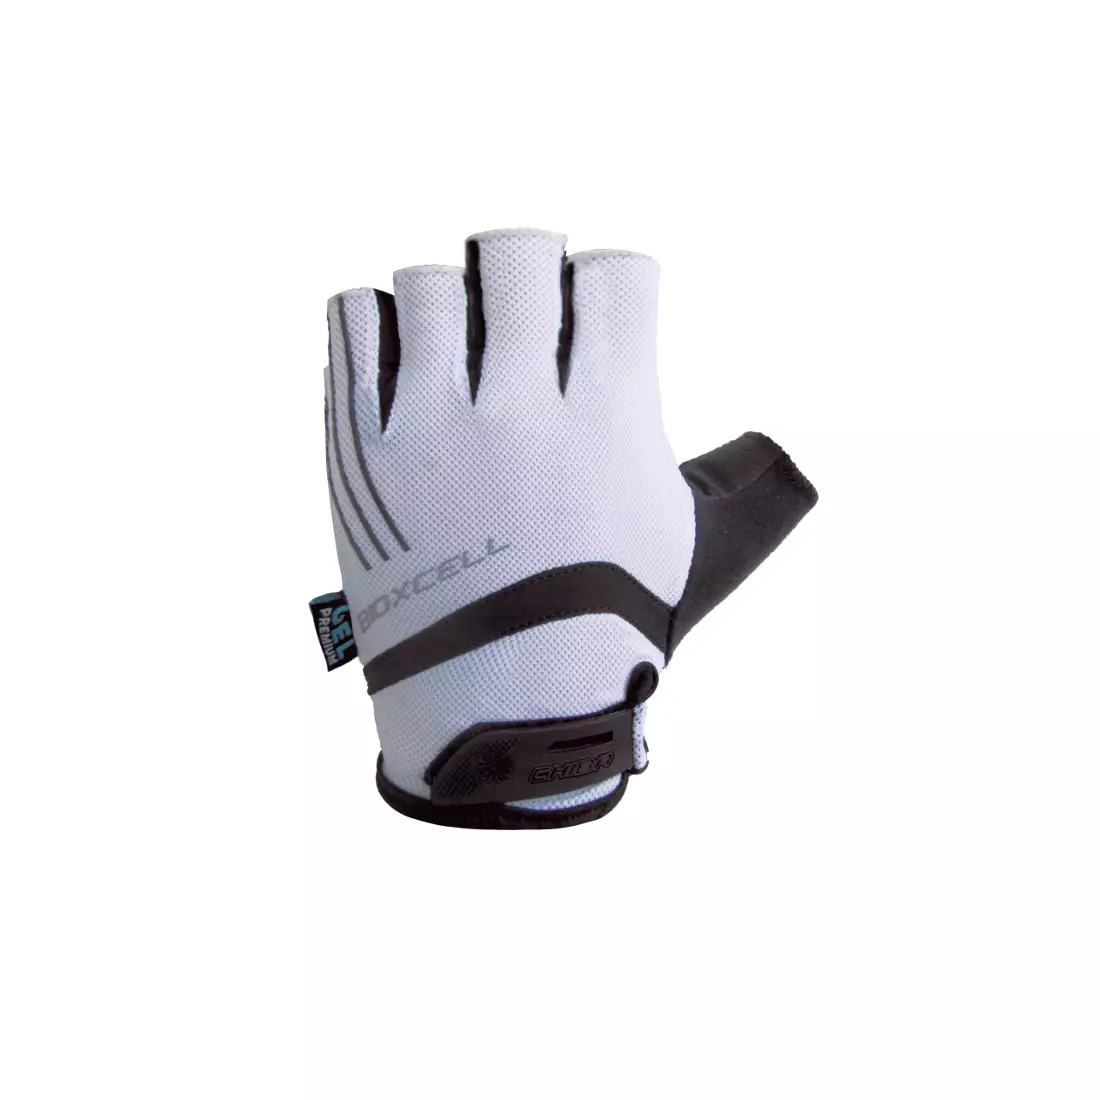 CHIBA LADY BIOXCELL PRO women's cycling gloves, white